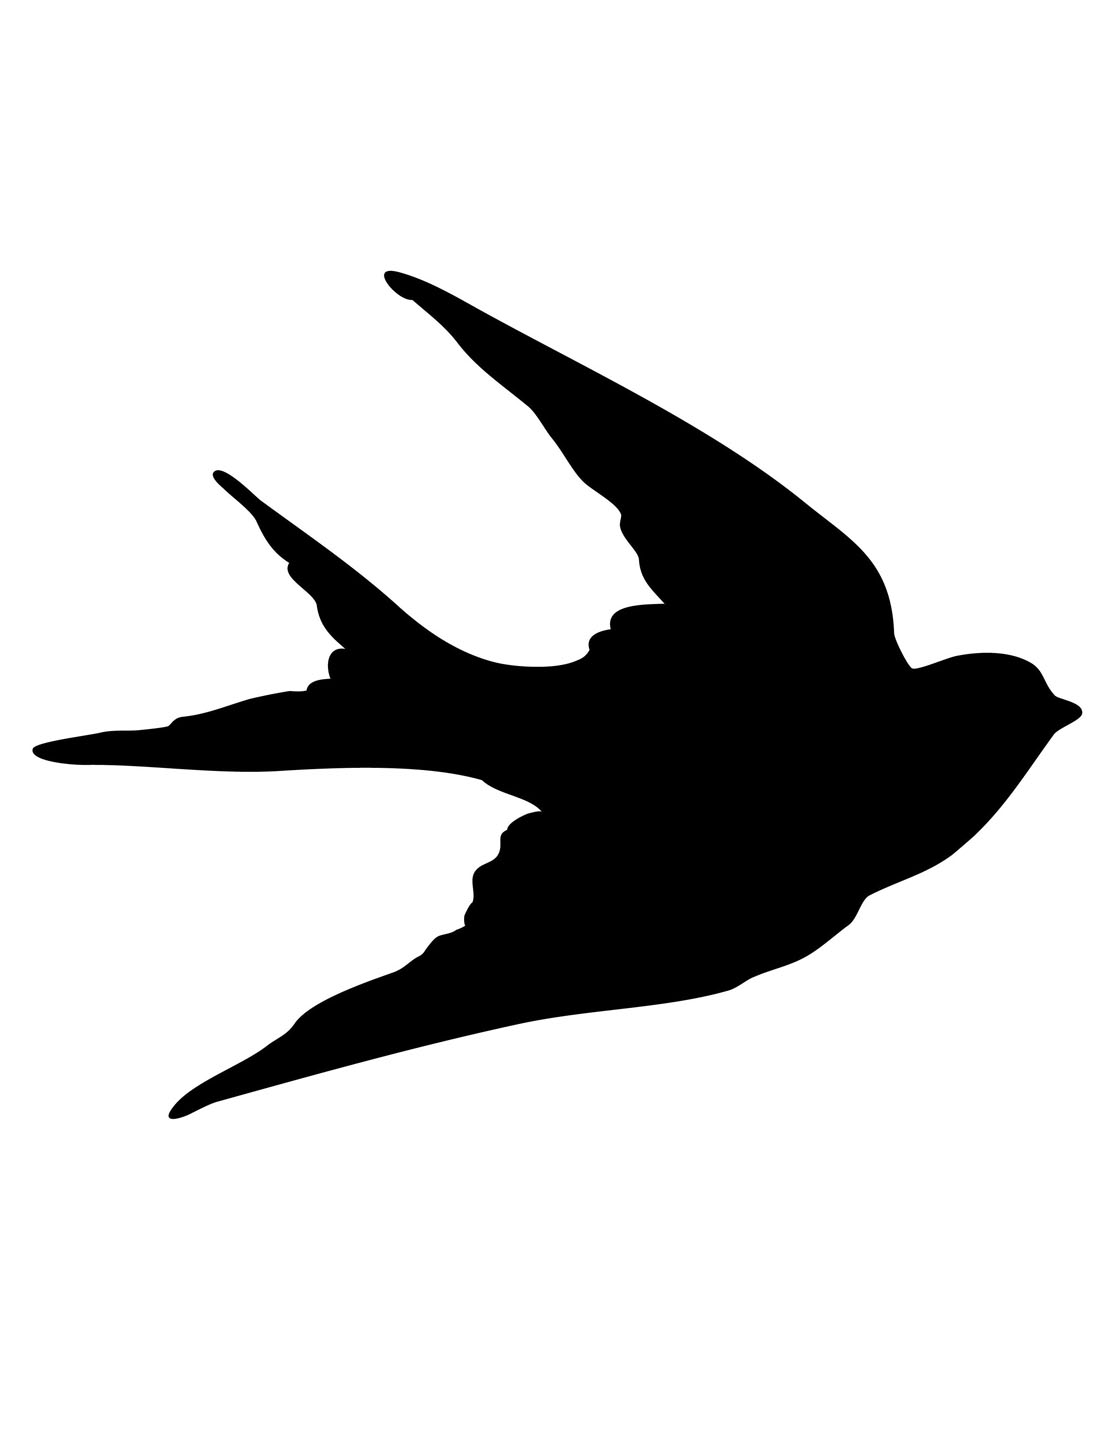 Transfer Printables   Bird Silhouettes   Swallows   The Graphics Fairy